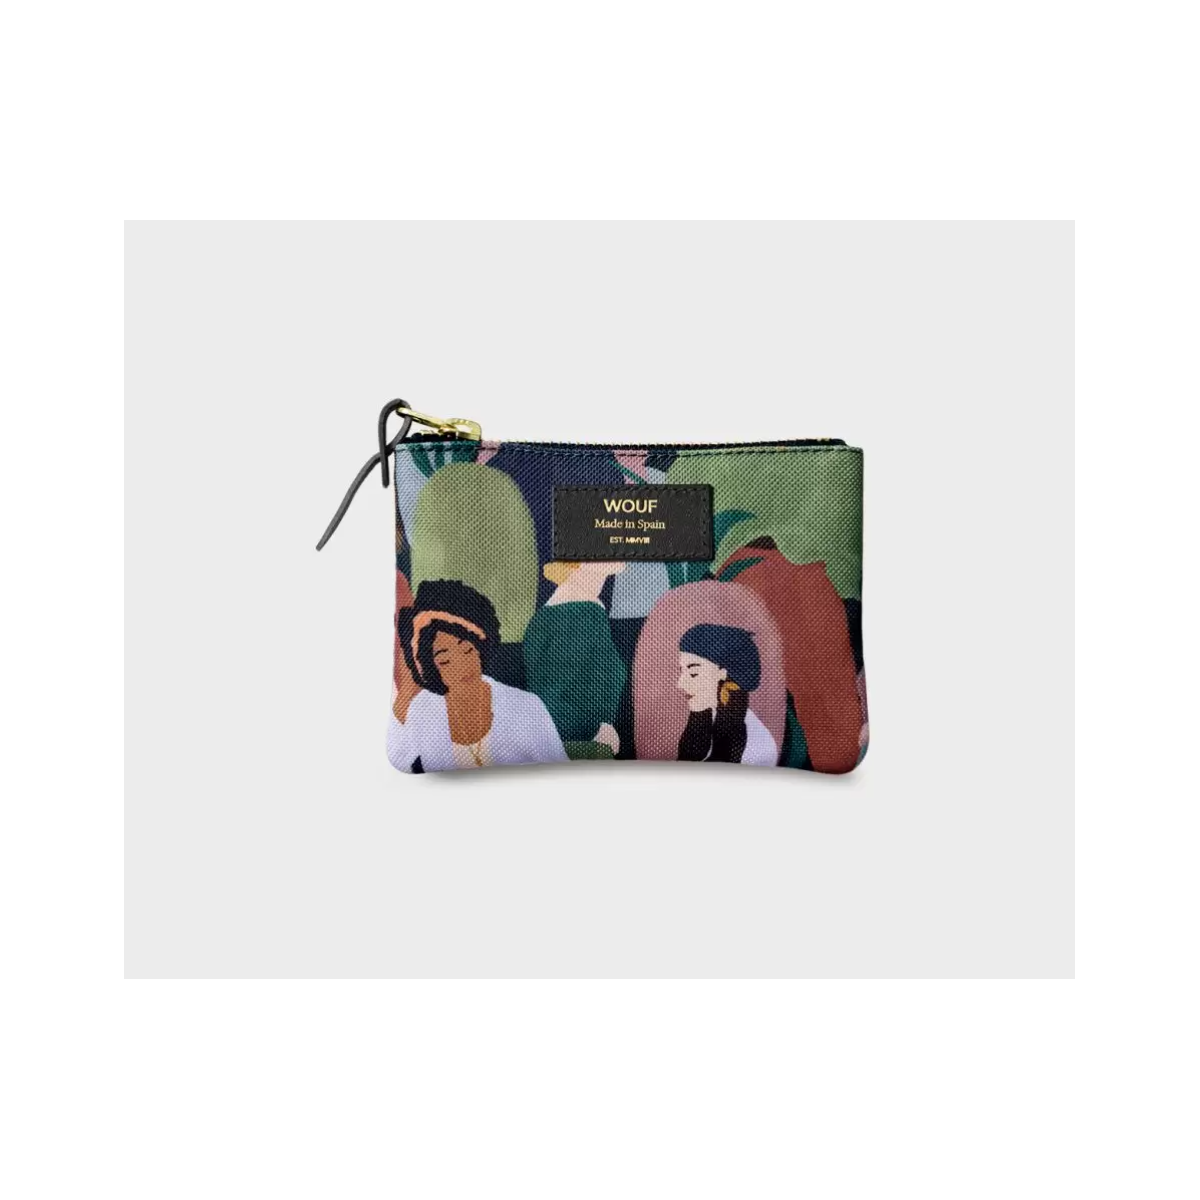 Gina small pouch